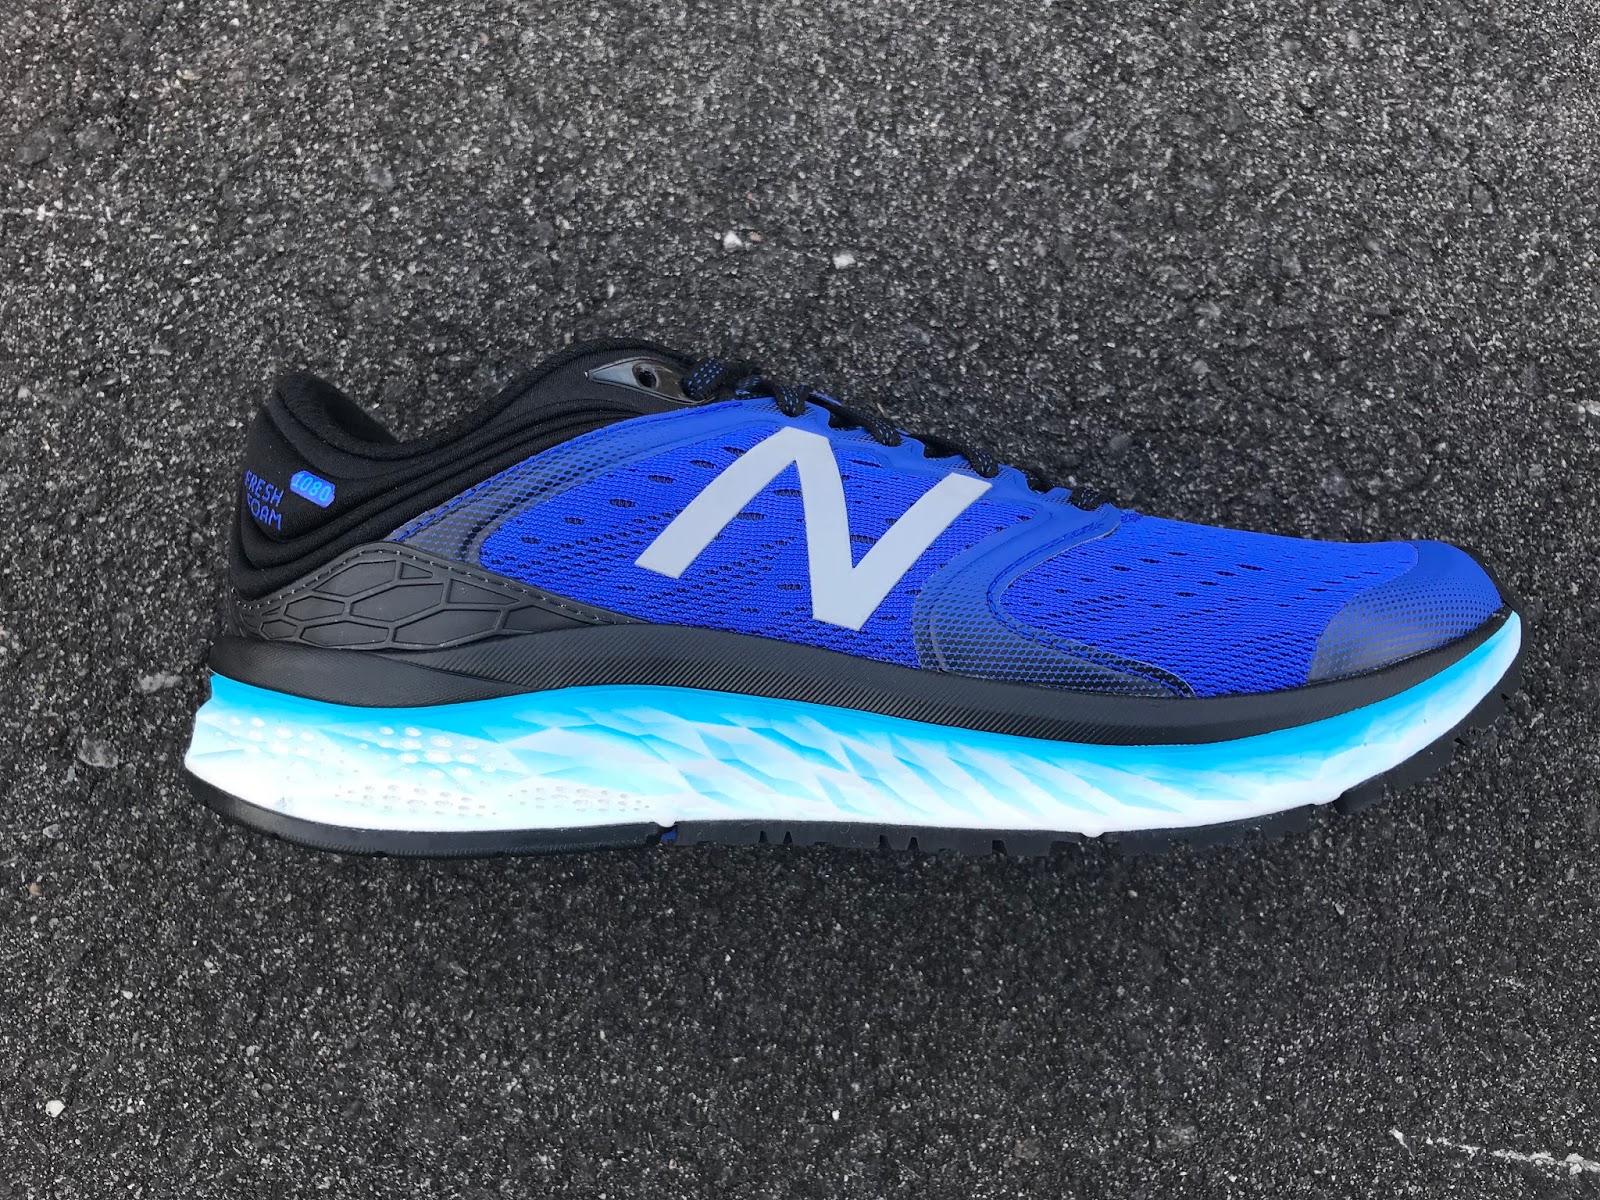 Road Trail Run: New Balance Fresh Foam 1080v8 with Detailed Comparisons to Brooks Levitate and Saucony Triumph ISO 4